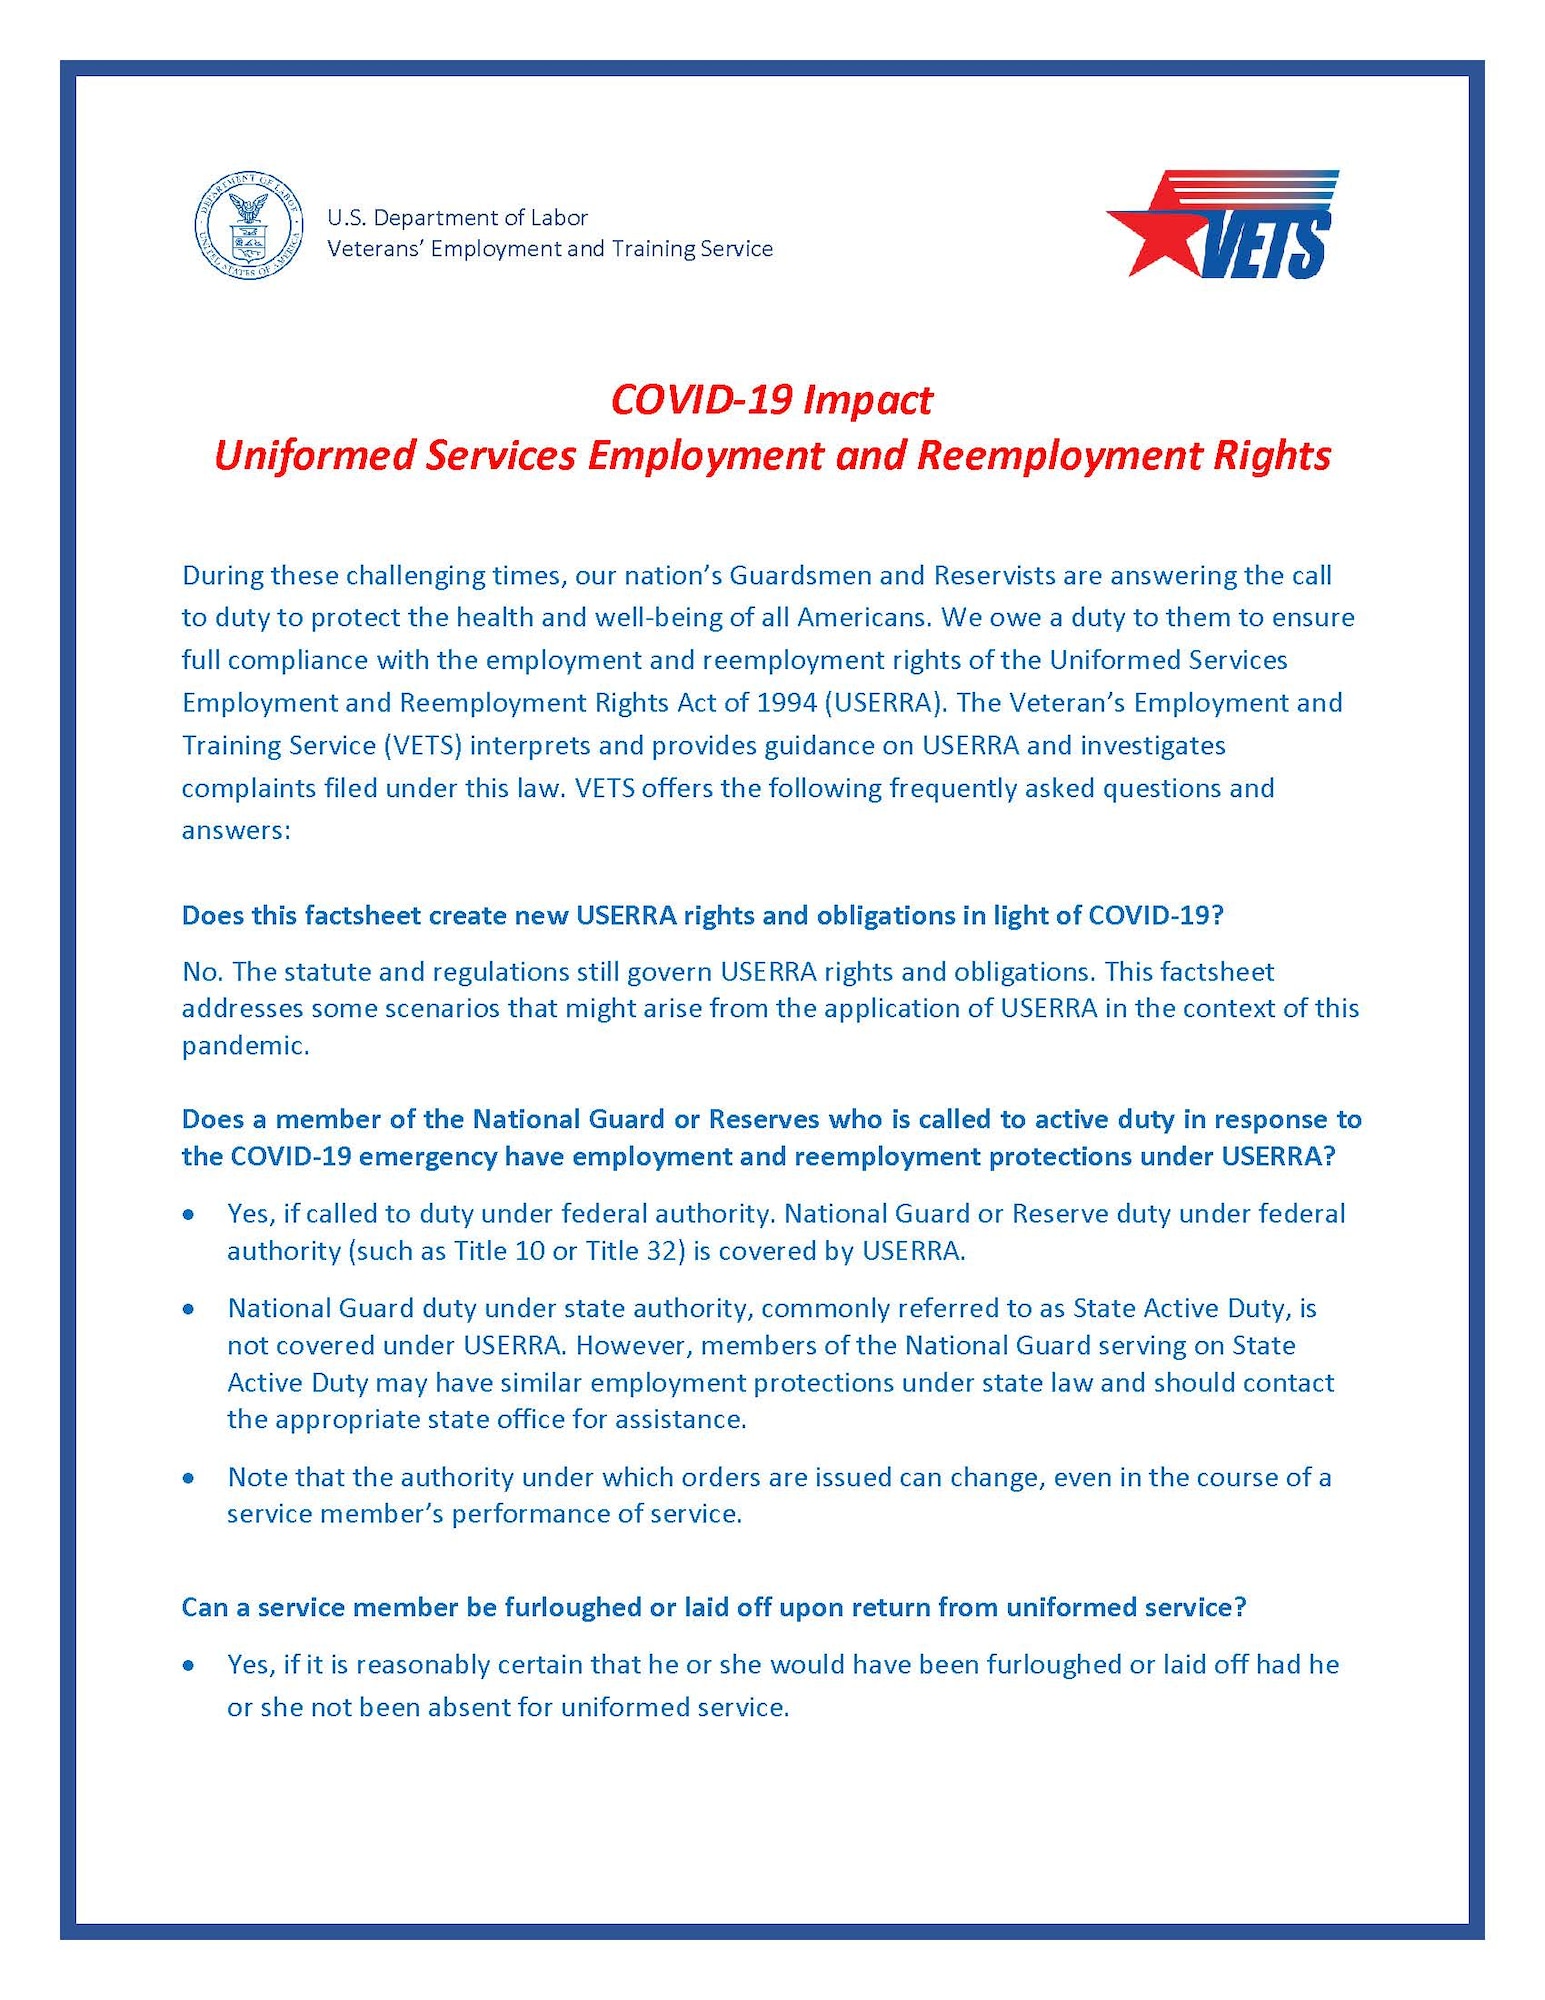 USERRA rights and obligations factsheets